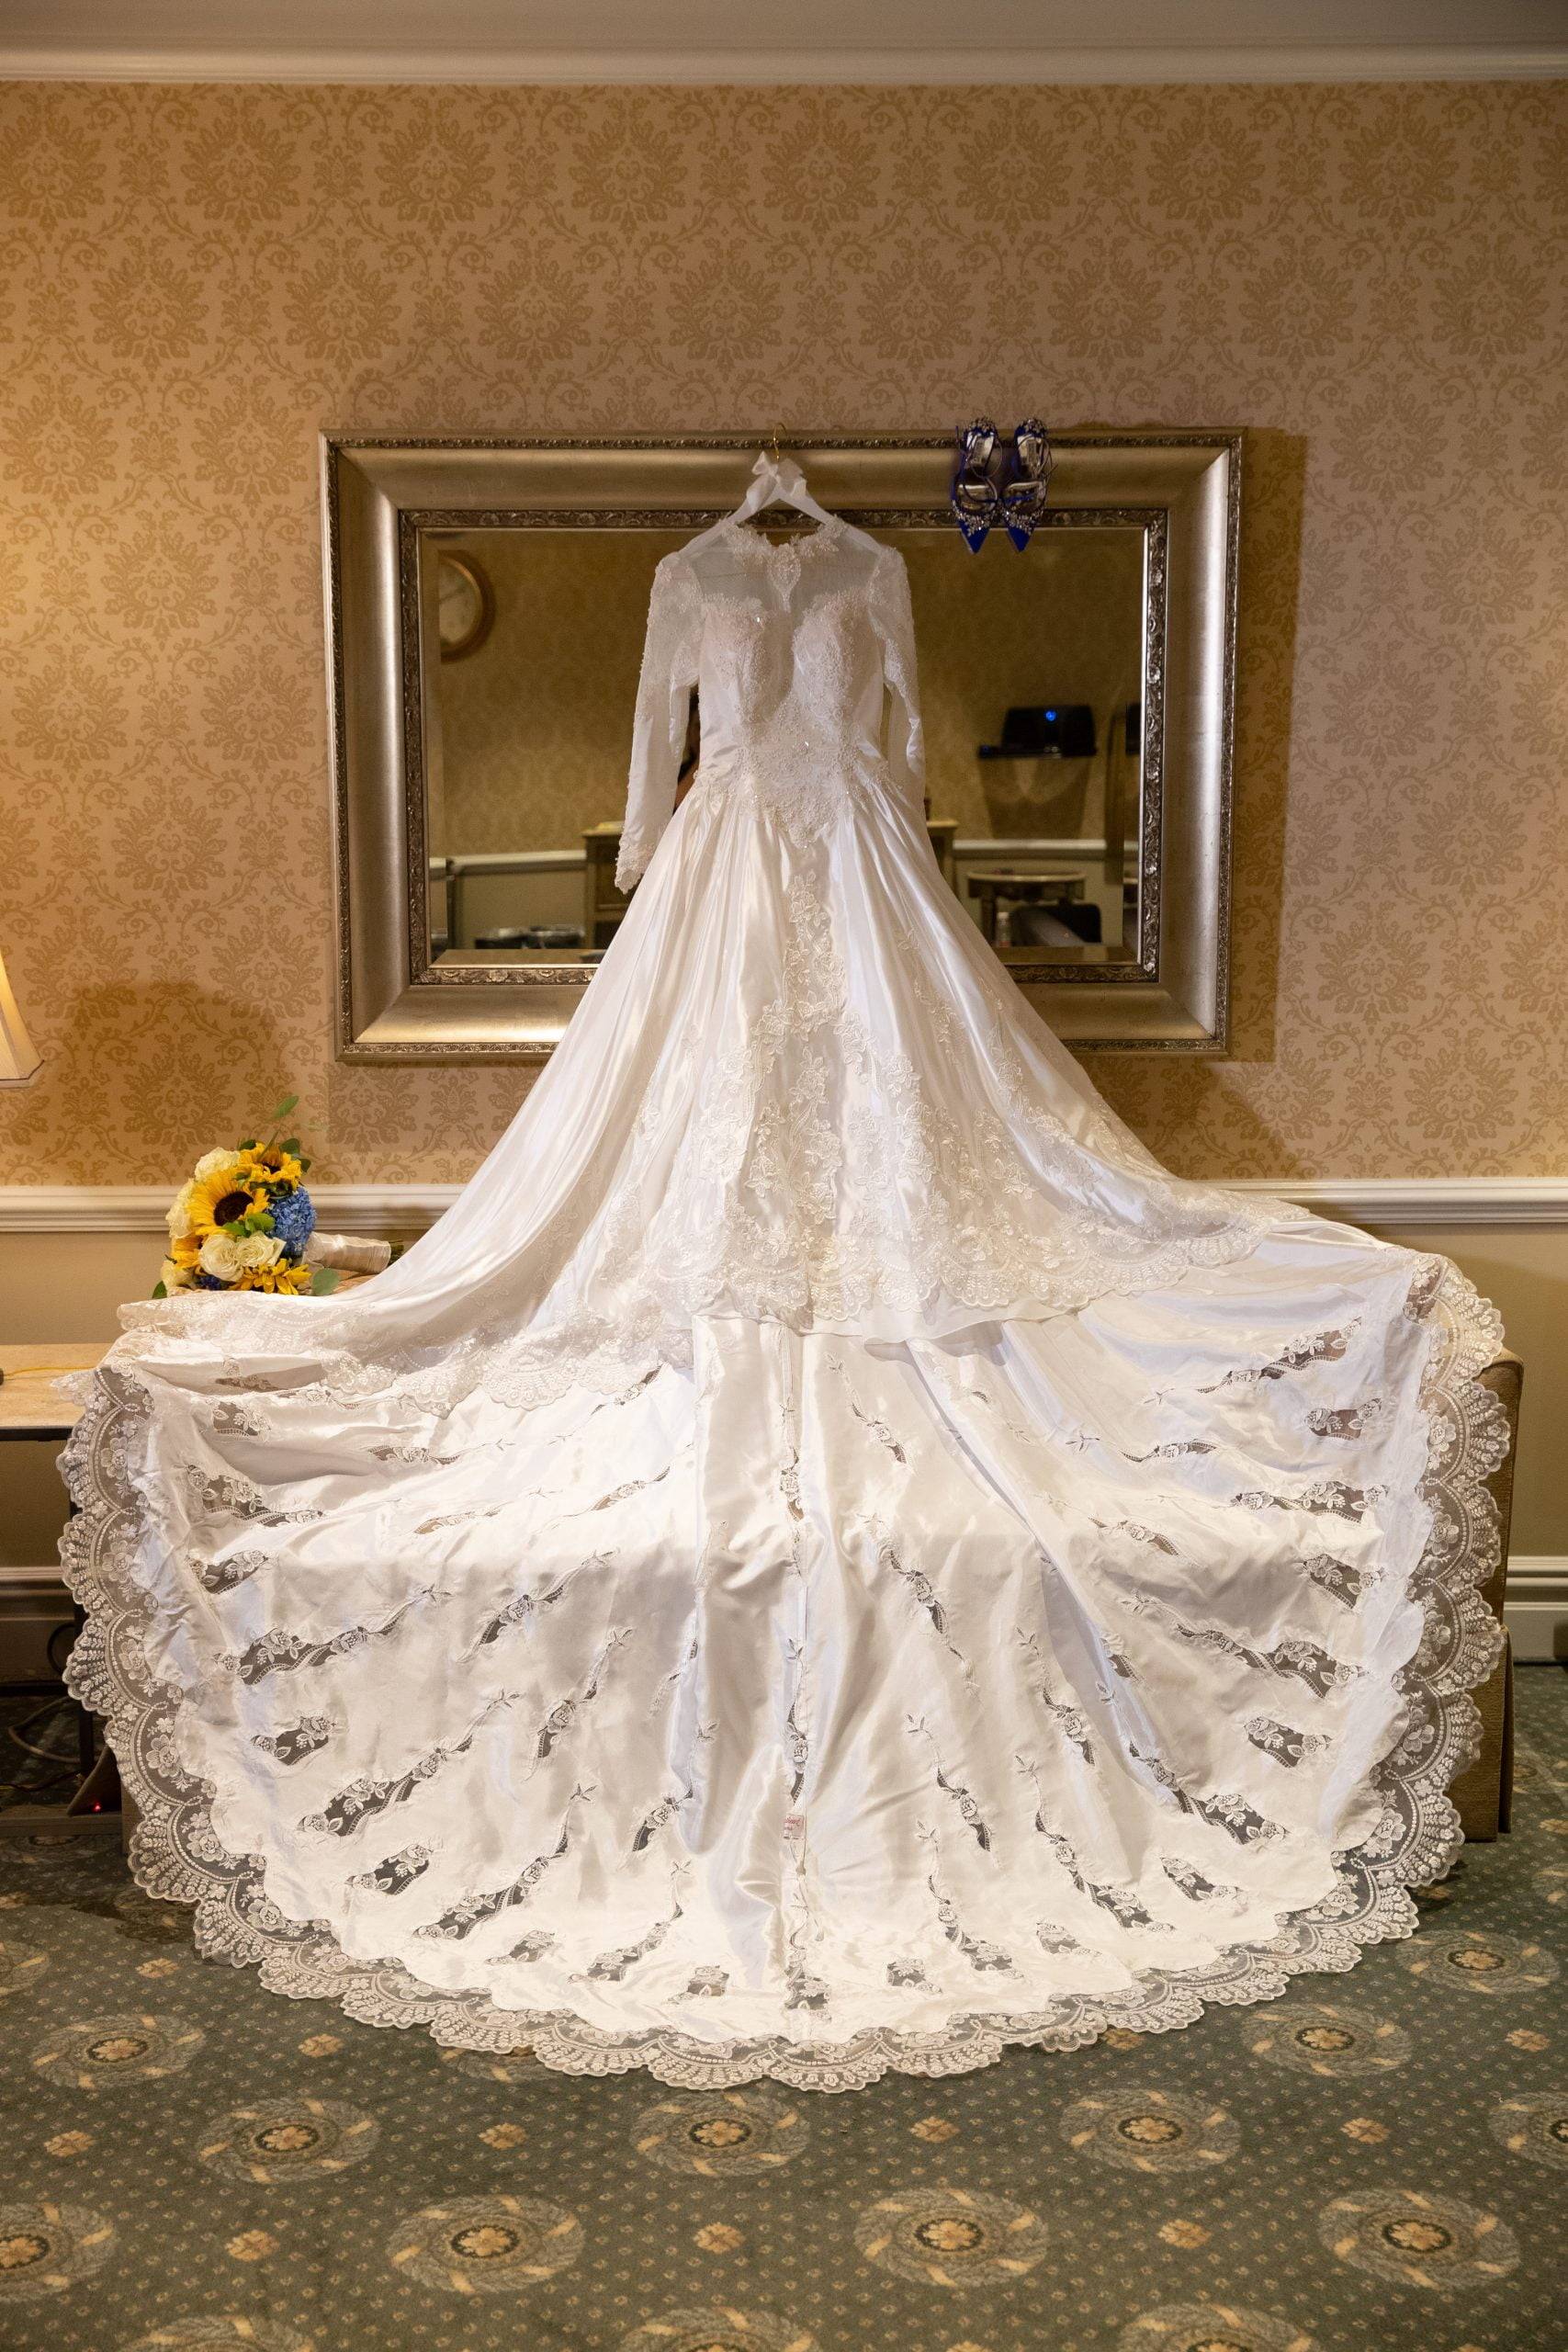 A wedding dress is on display in a hotel room.